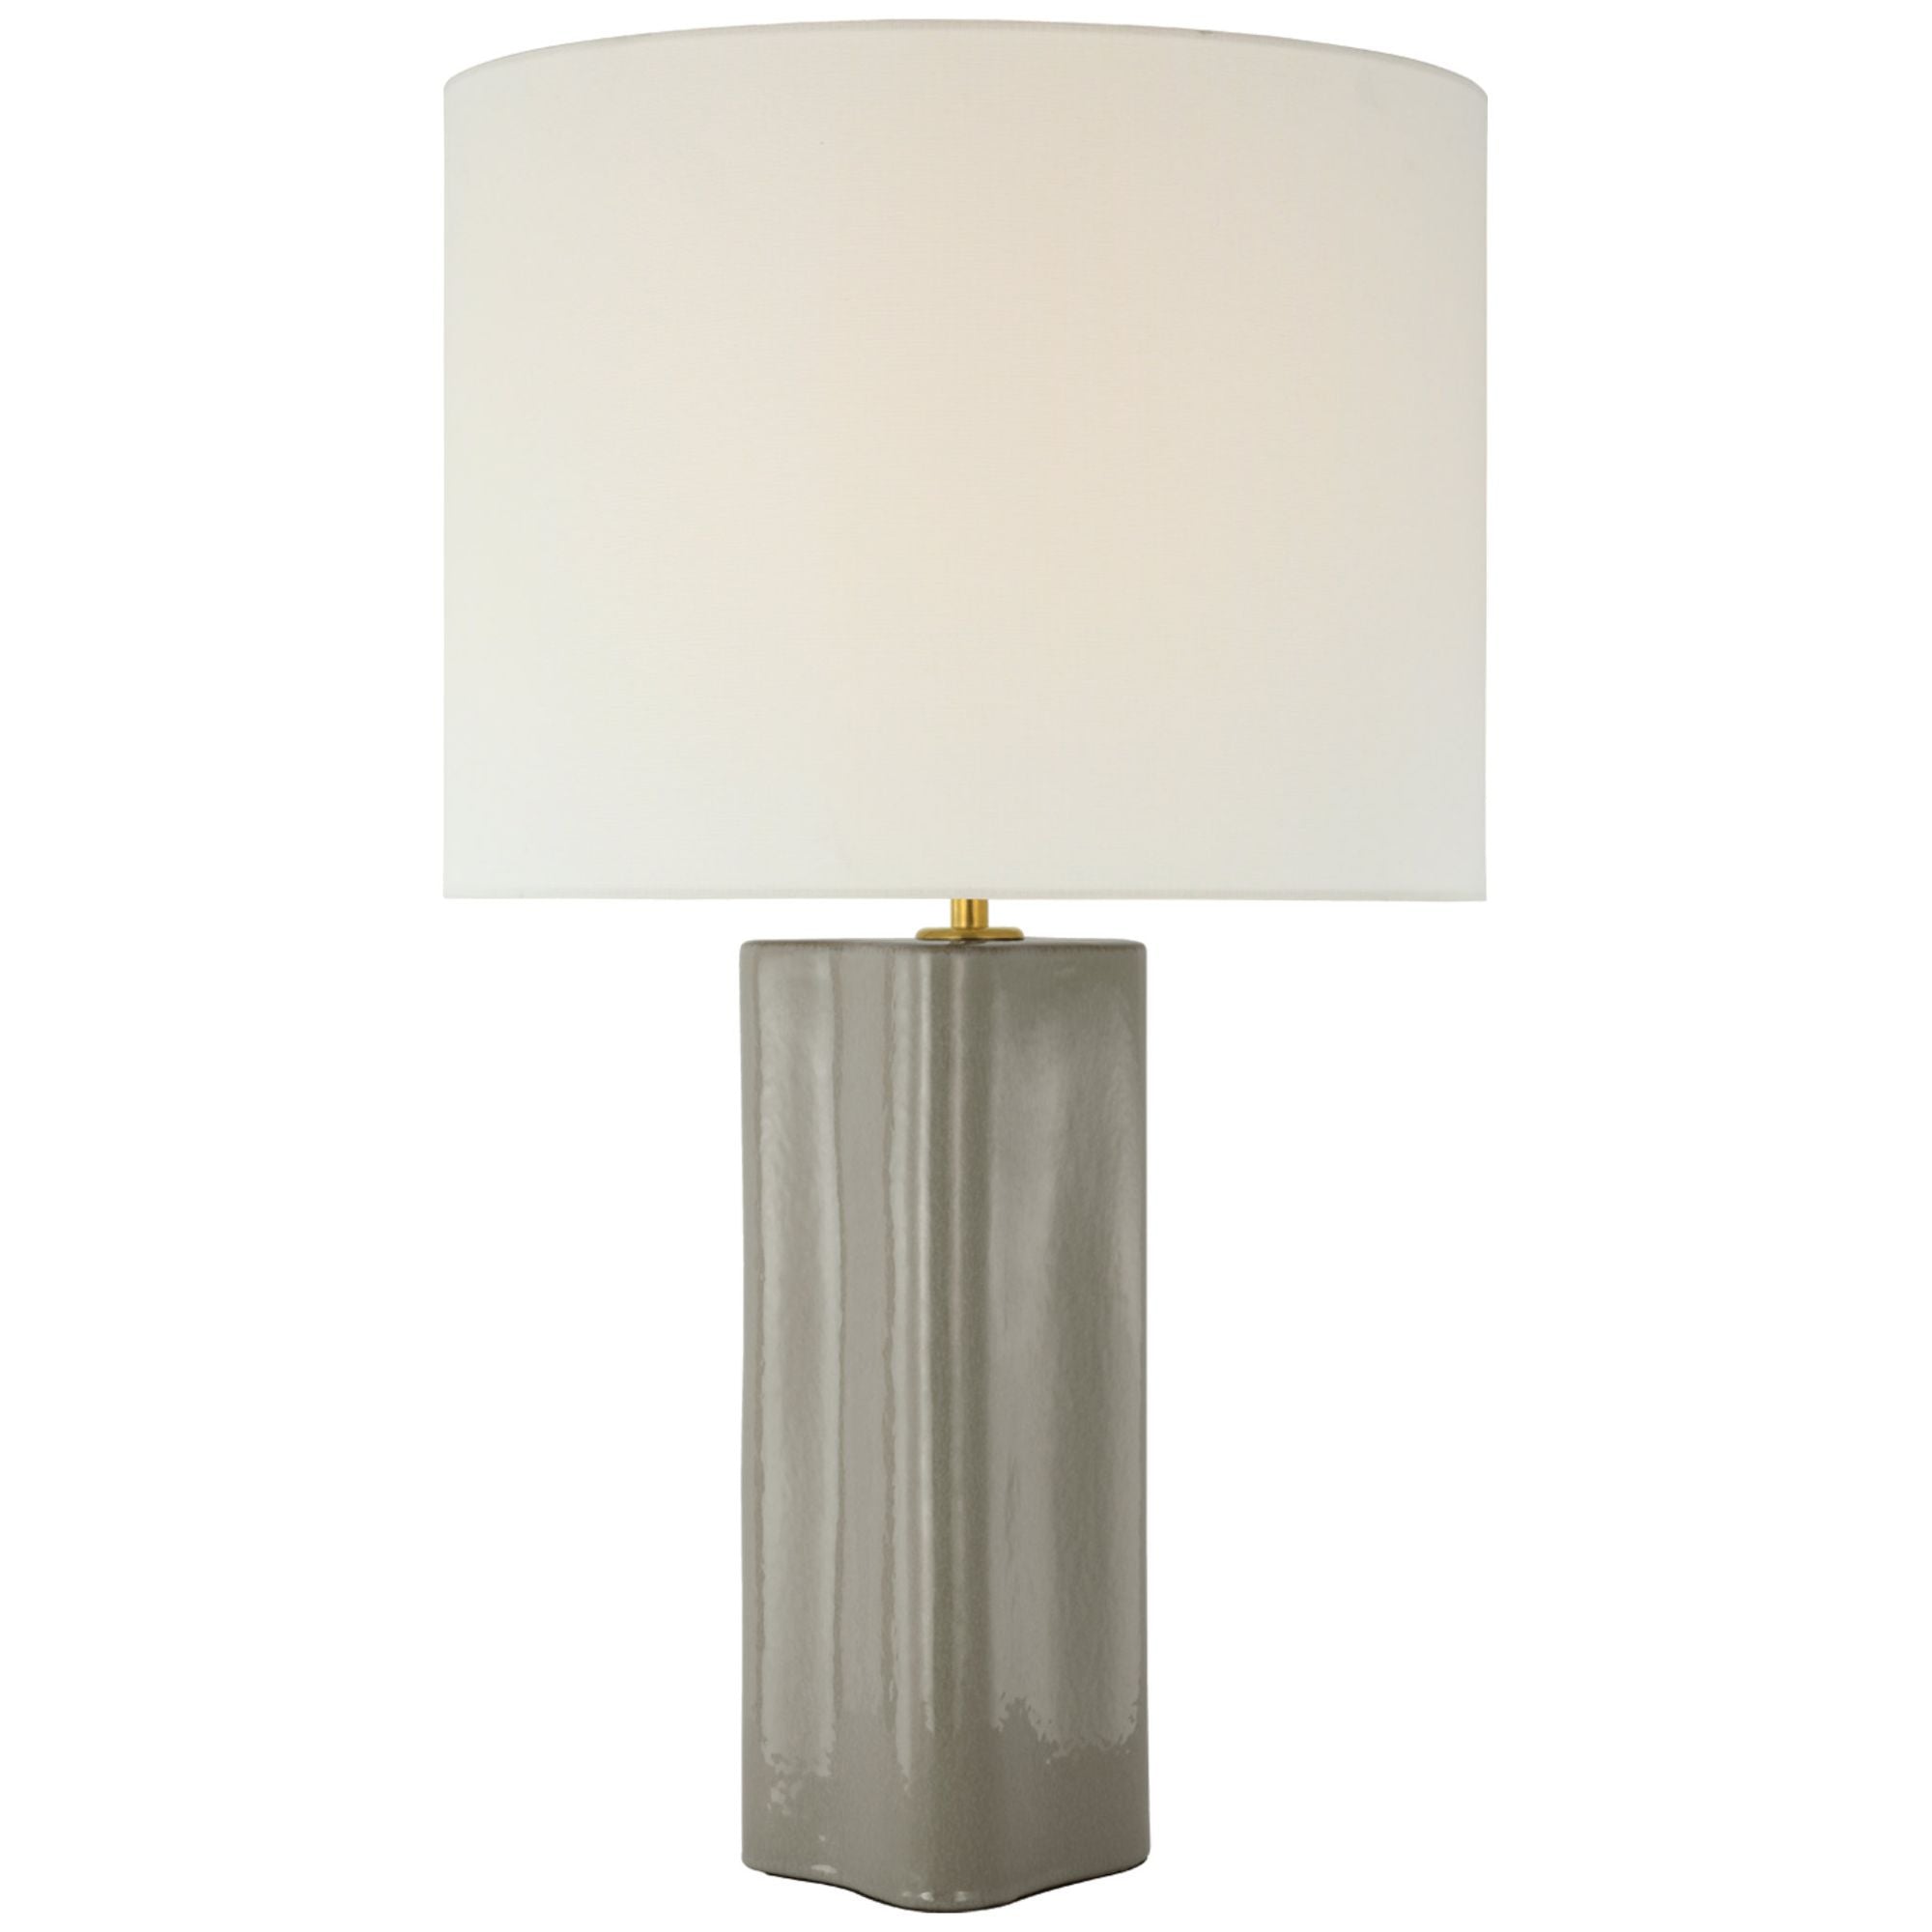 AERIN Mishca Large Table Lamp in Shellish Gray with Linen Shade